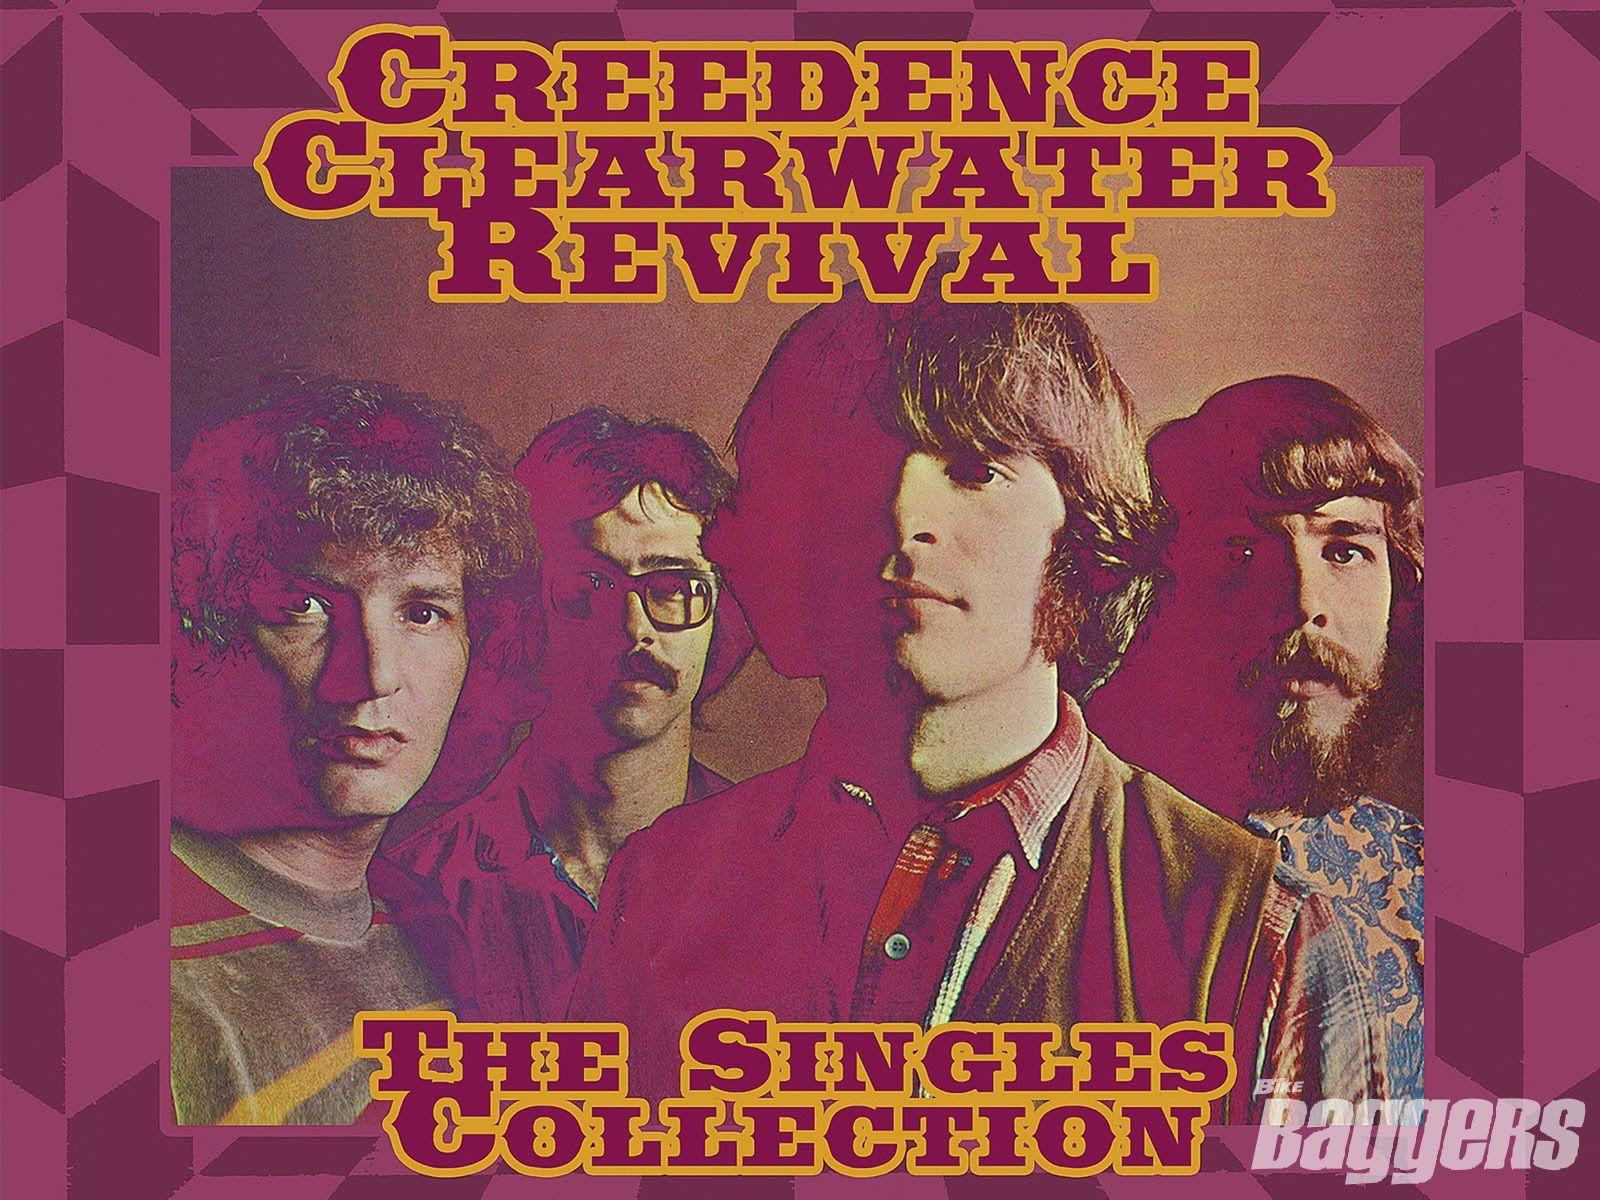 CD Collection Creedence Clearwater Revival Elton John Rage